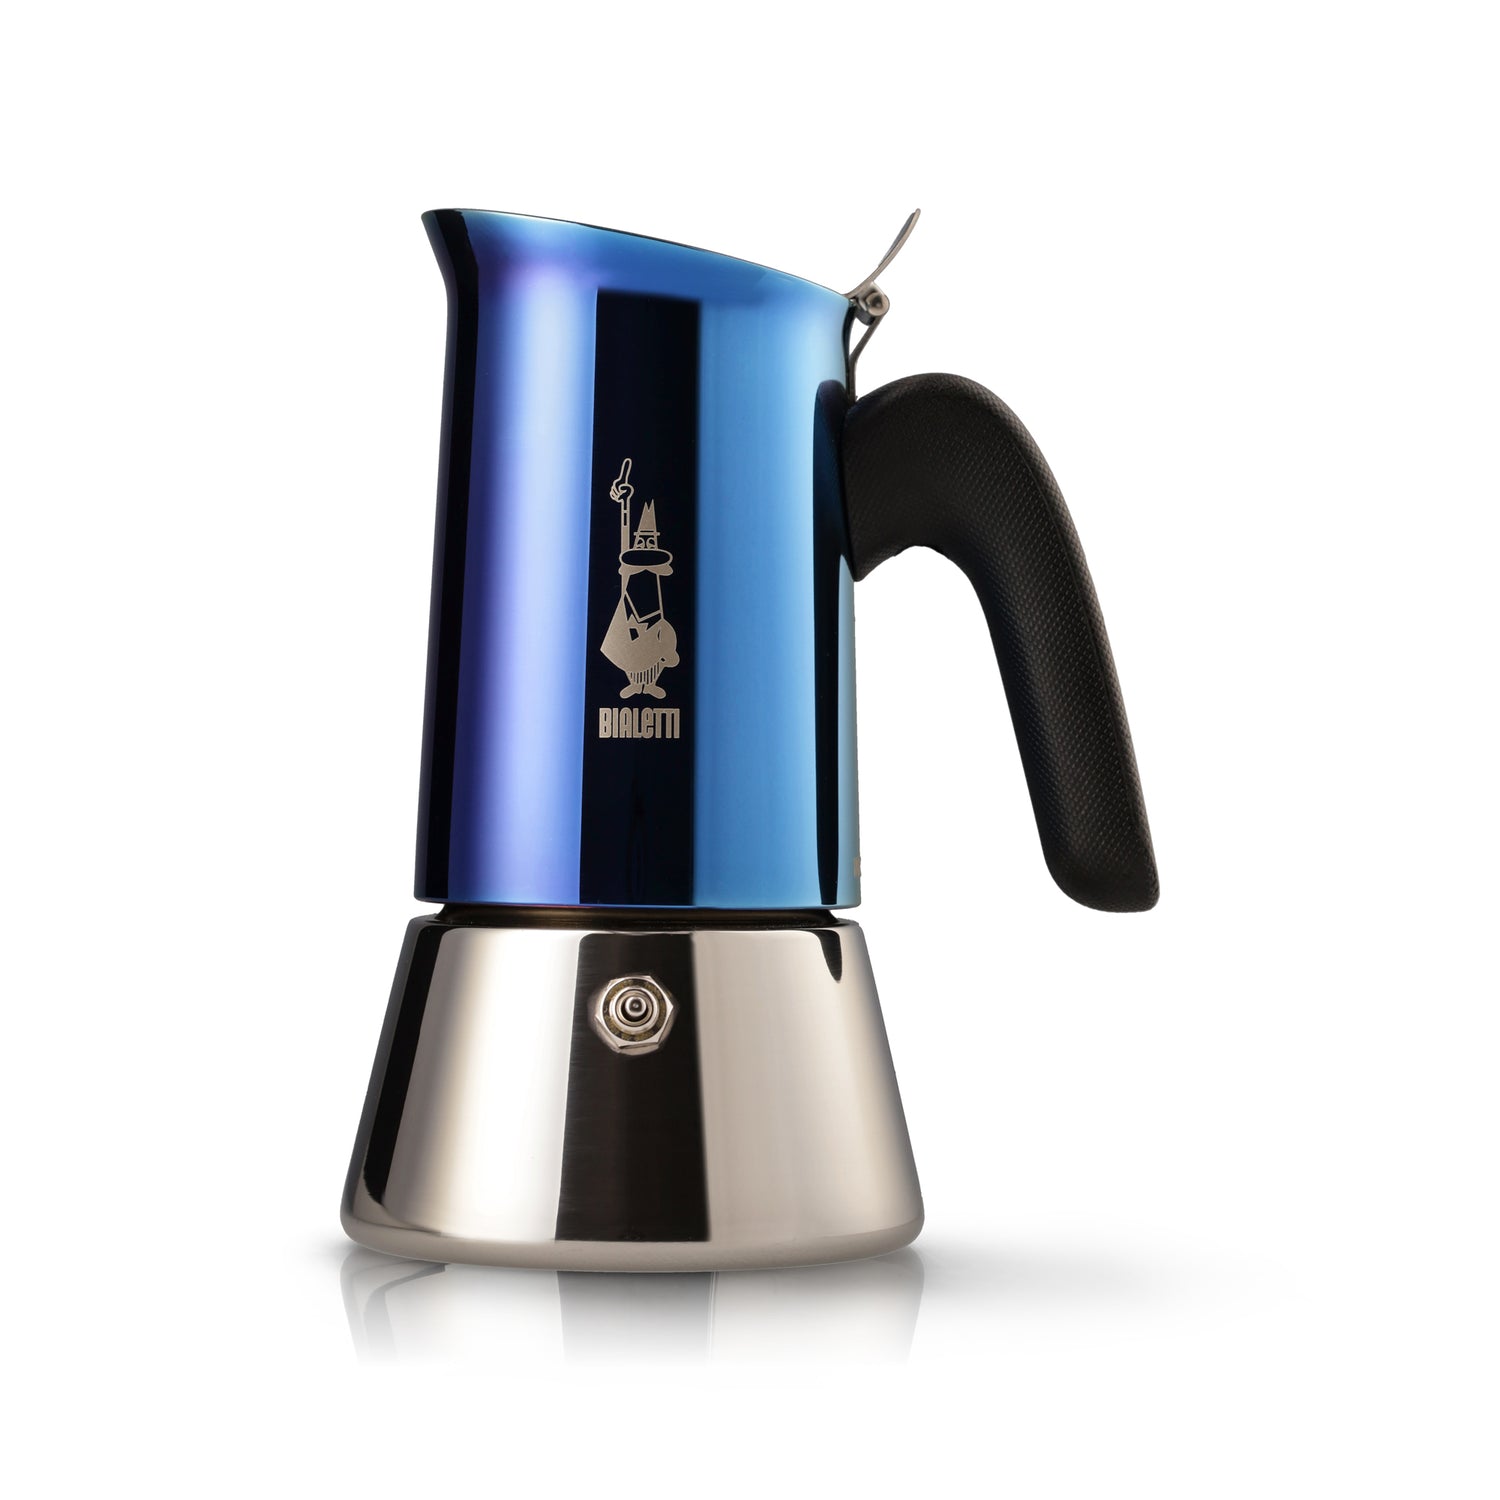 Bialetti coffee maker product photography